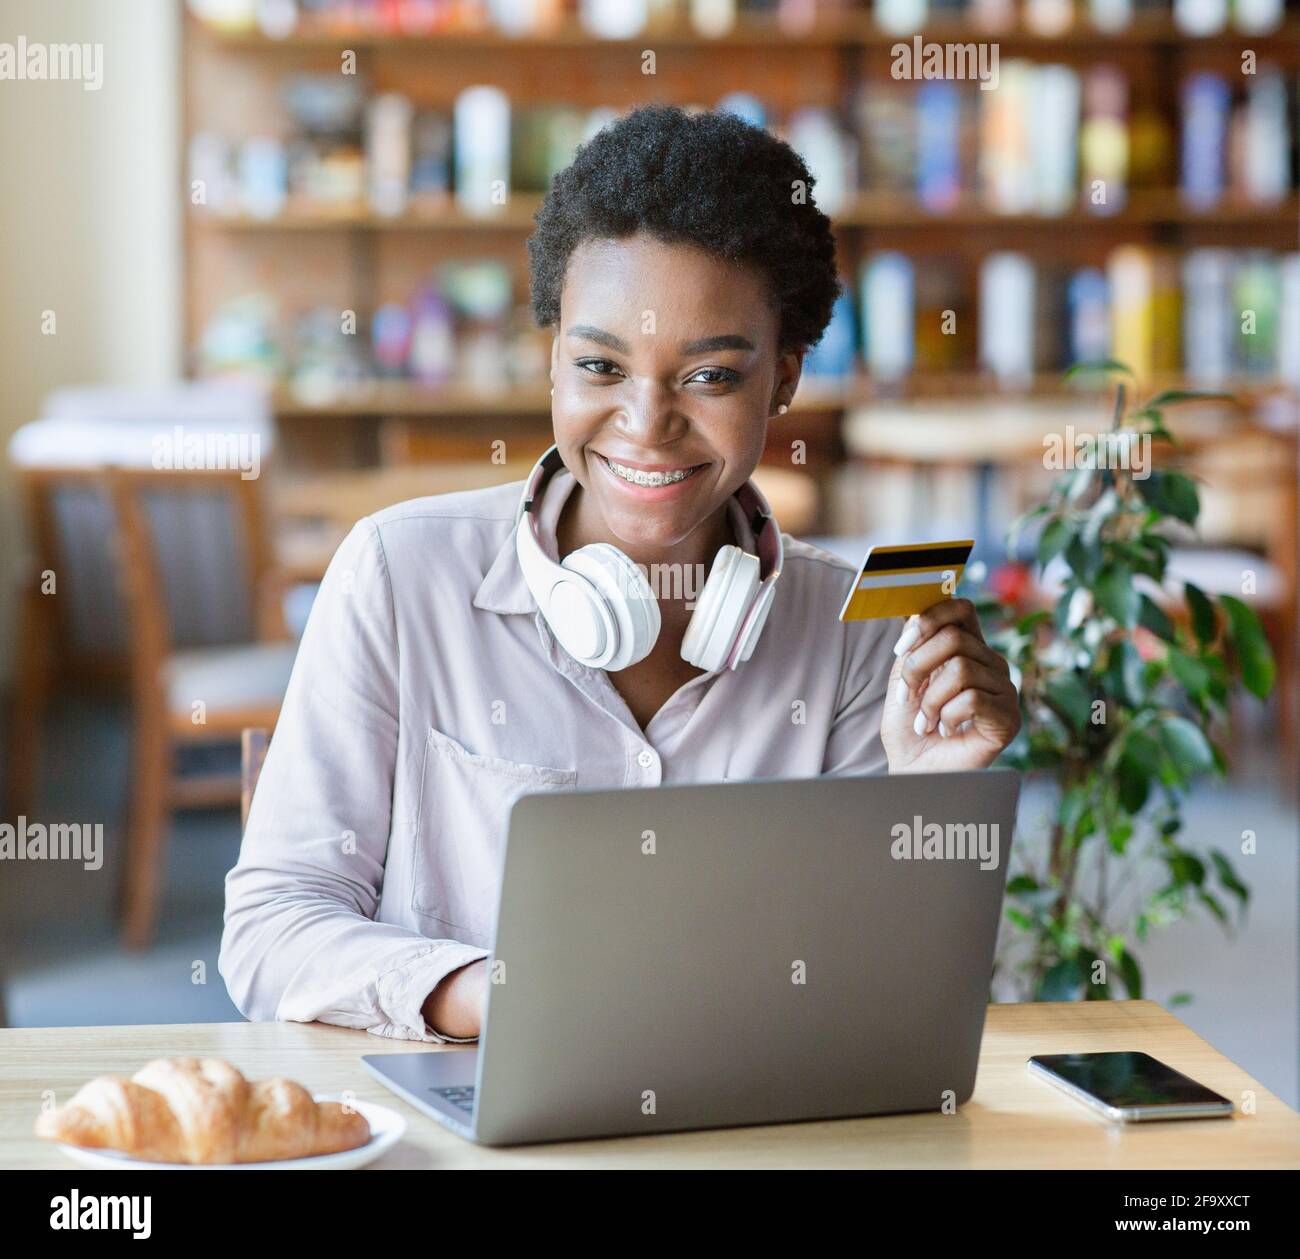 Portrait of happy young black woman with headphones and credit card using laptop for online shopping at cafe Stock Photo